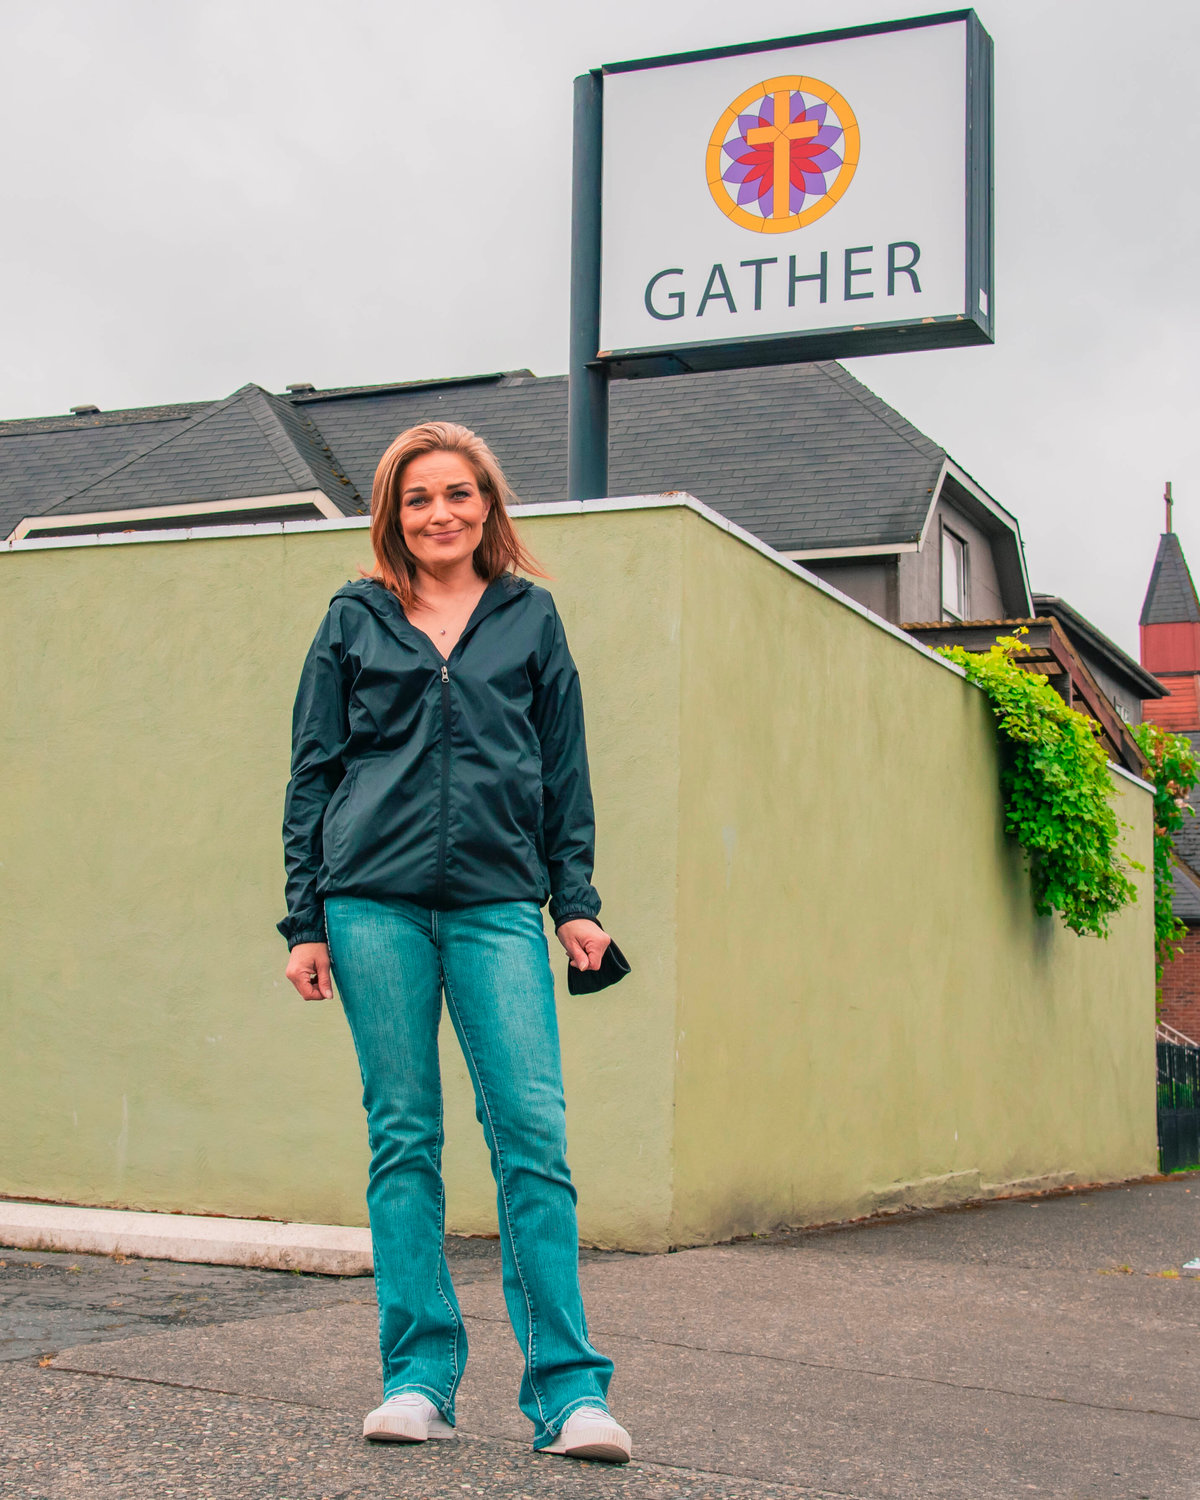 Brooke Reder smiles and poses for a photo outside the Gather Cafe in Centralia on Monday.